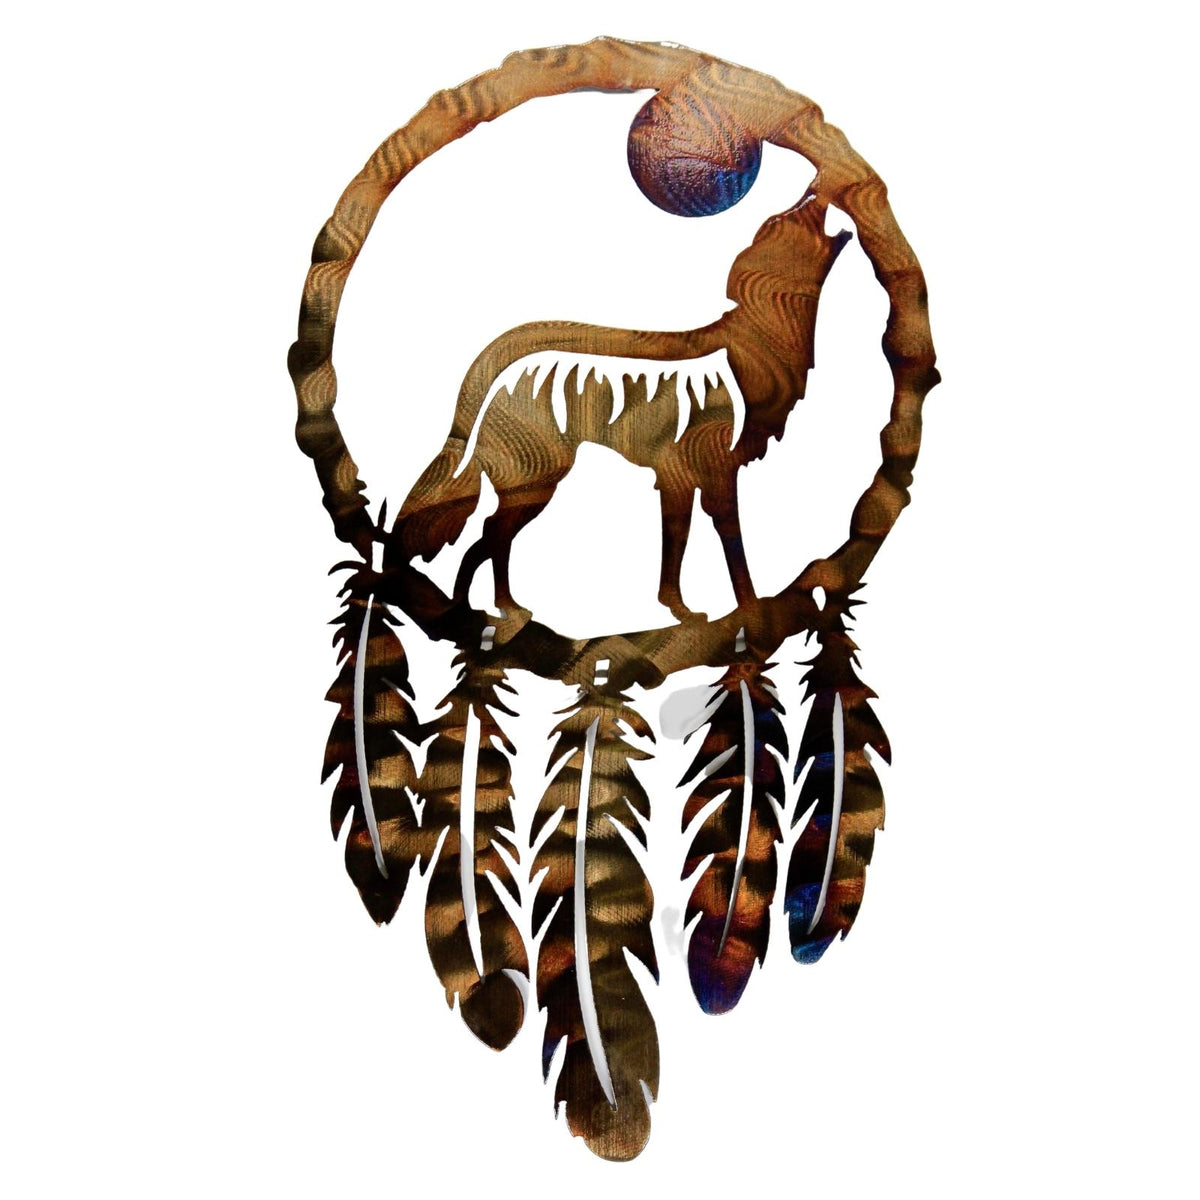 Call of the Wild Wolf Dream Catcher — Reflections In Metal